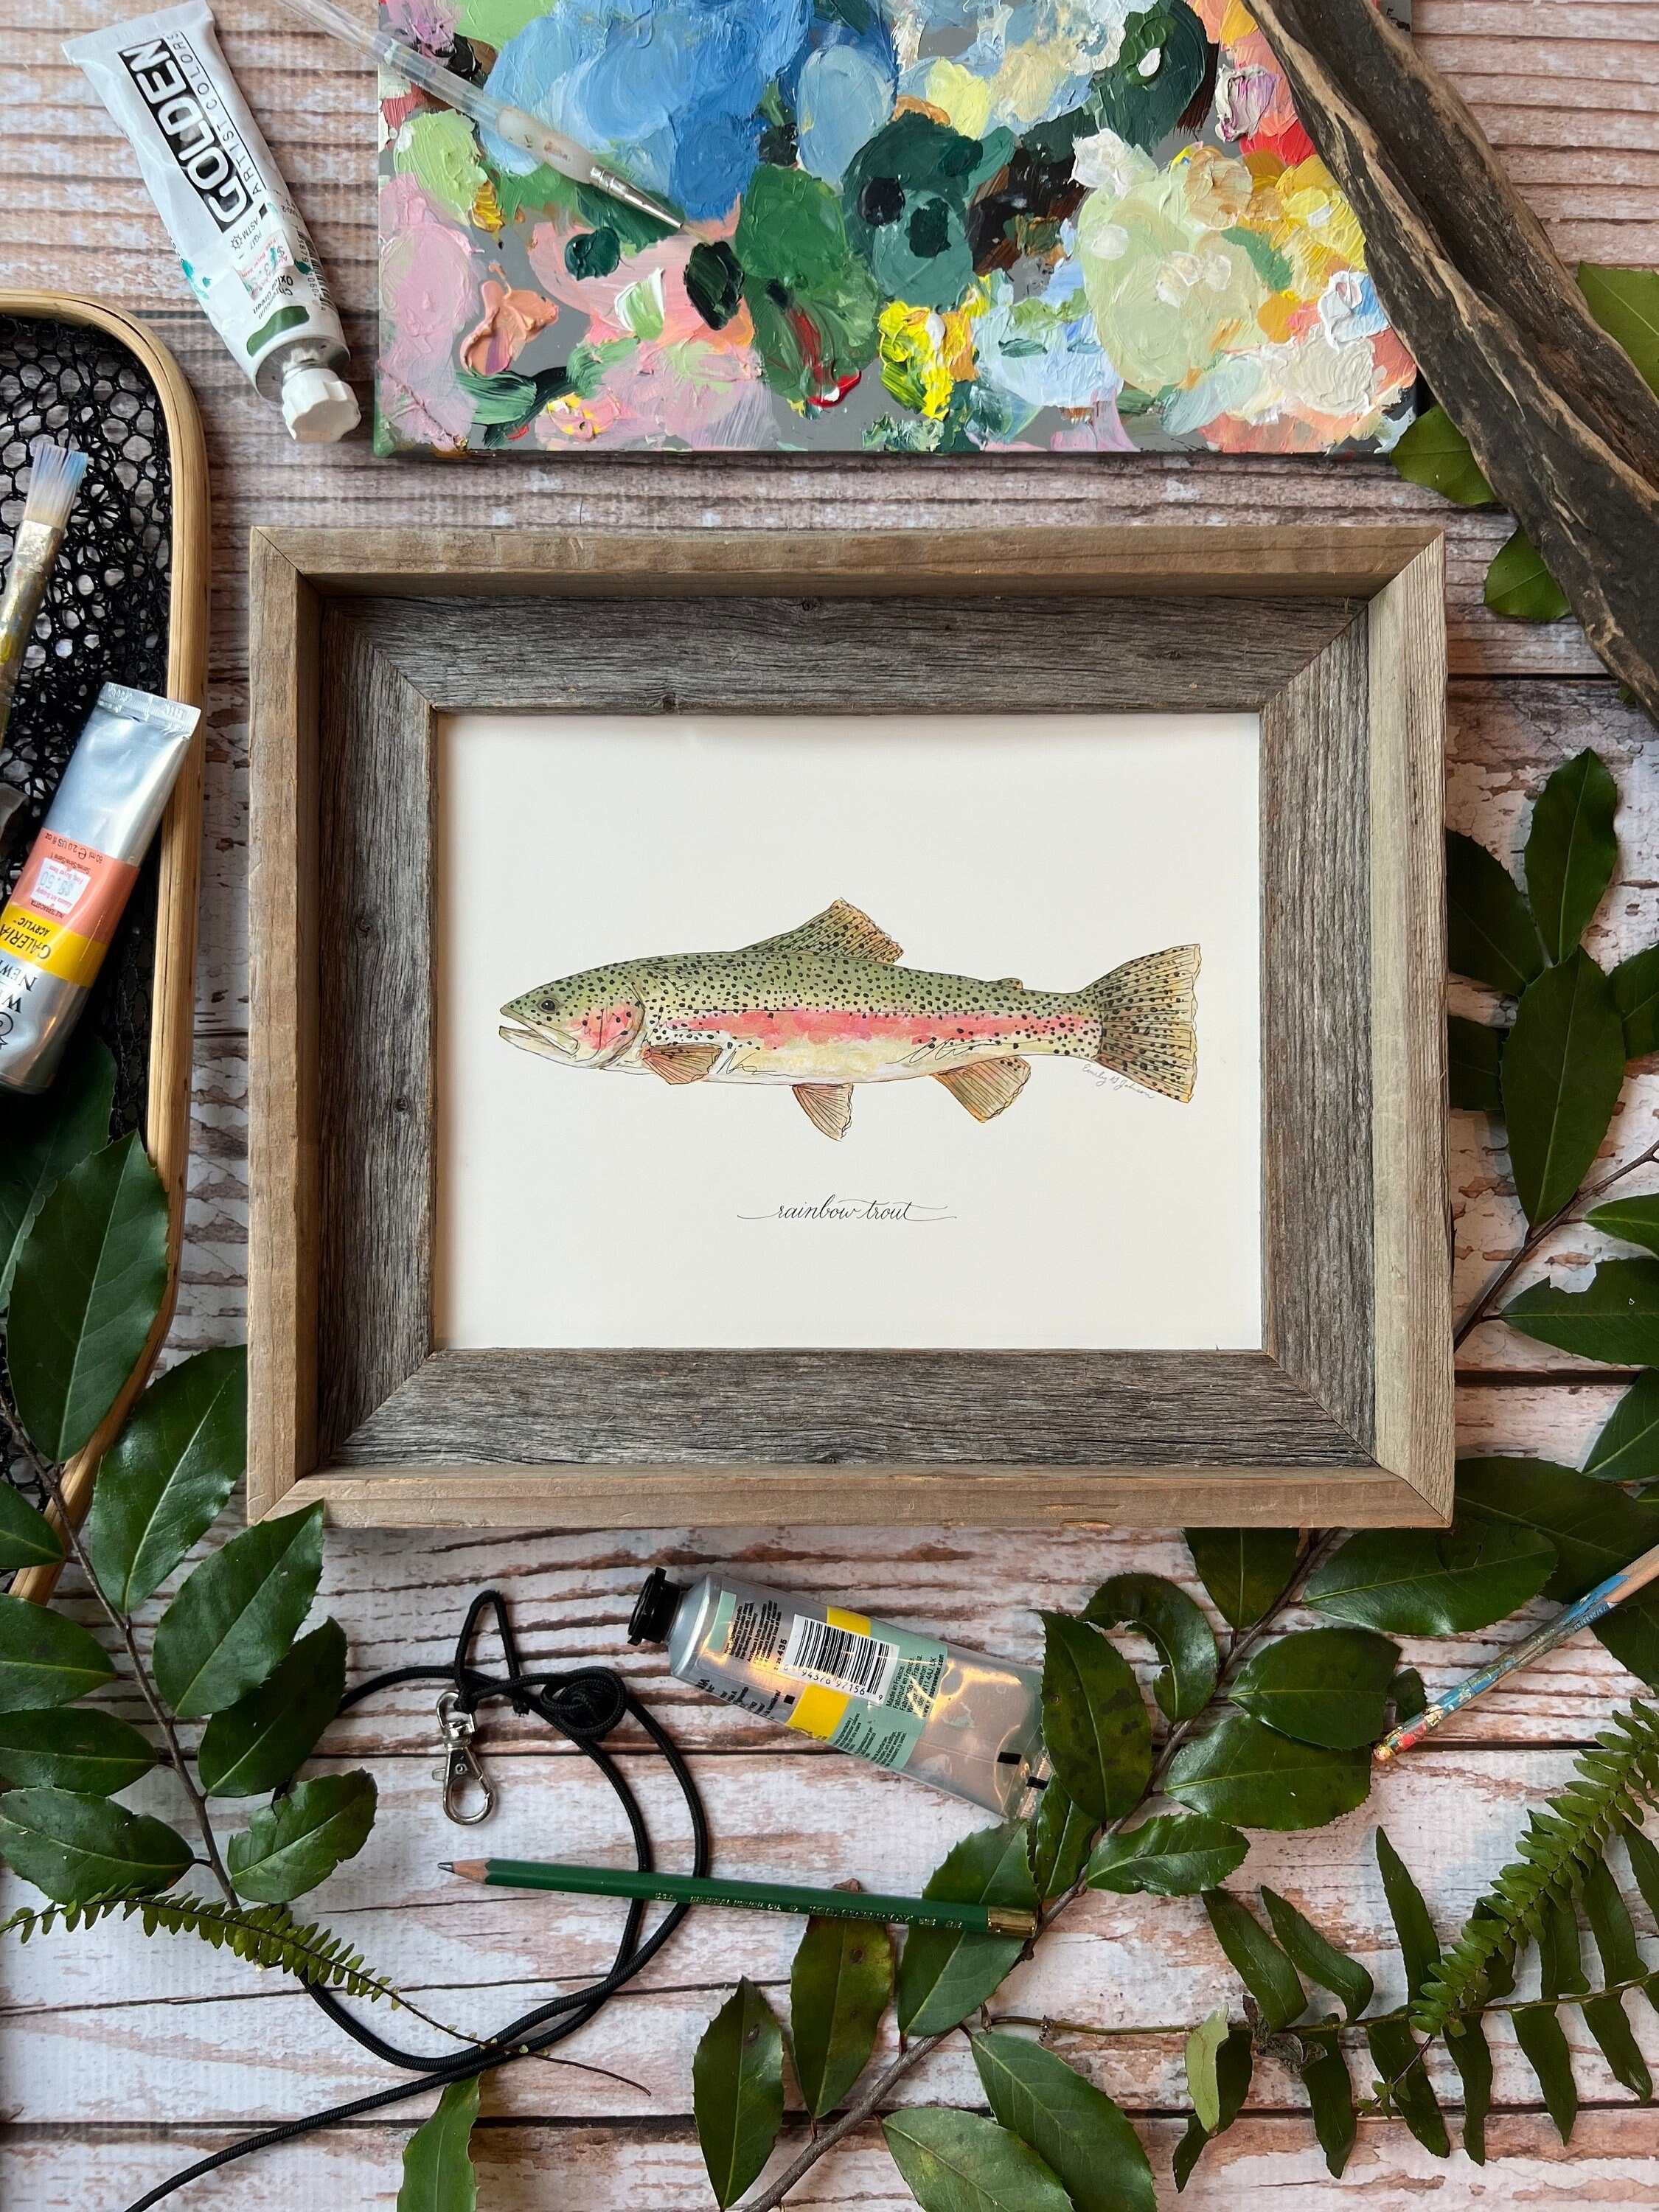 Rainbow Trout Fly Fishing Fish Shadow Box Framed Man Cave Cabin